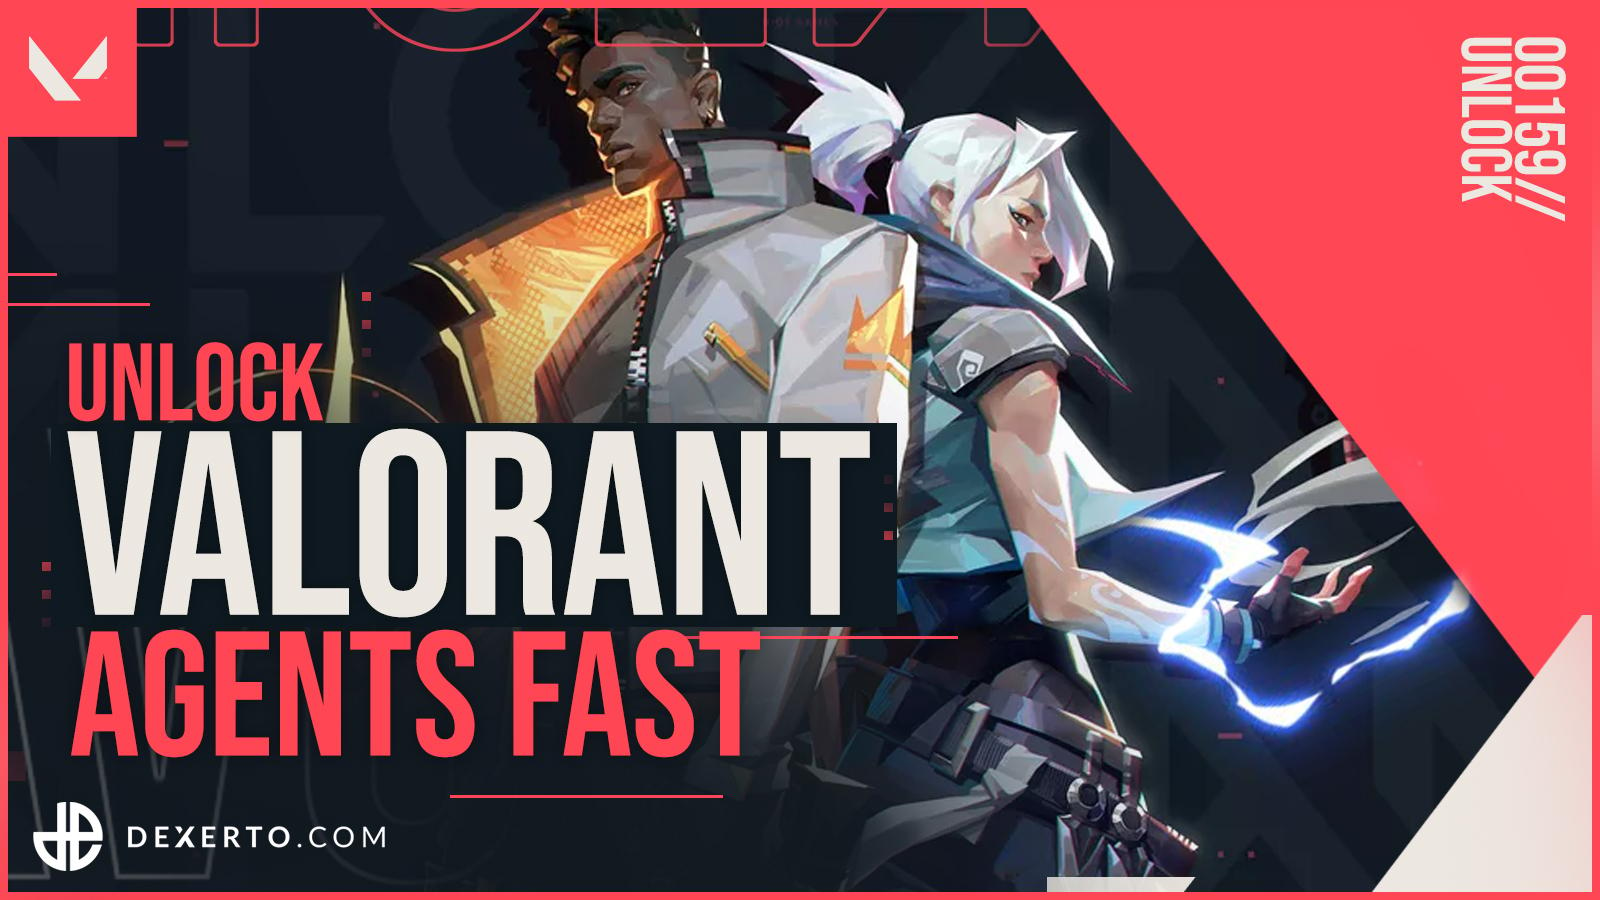 How to unlock Valorant Agents fast